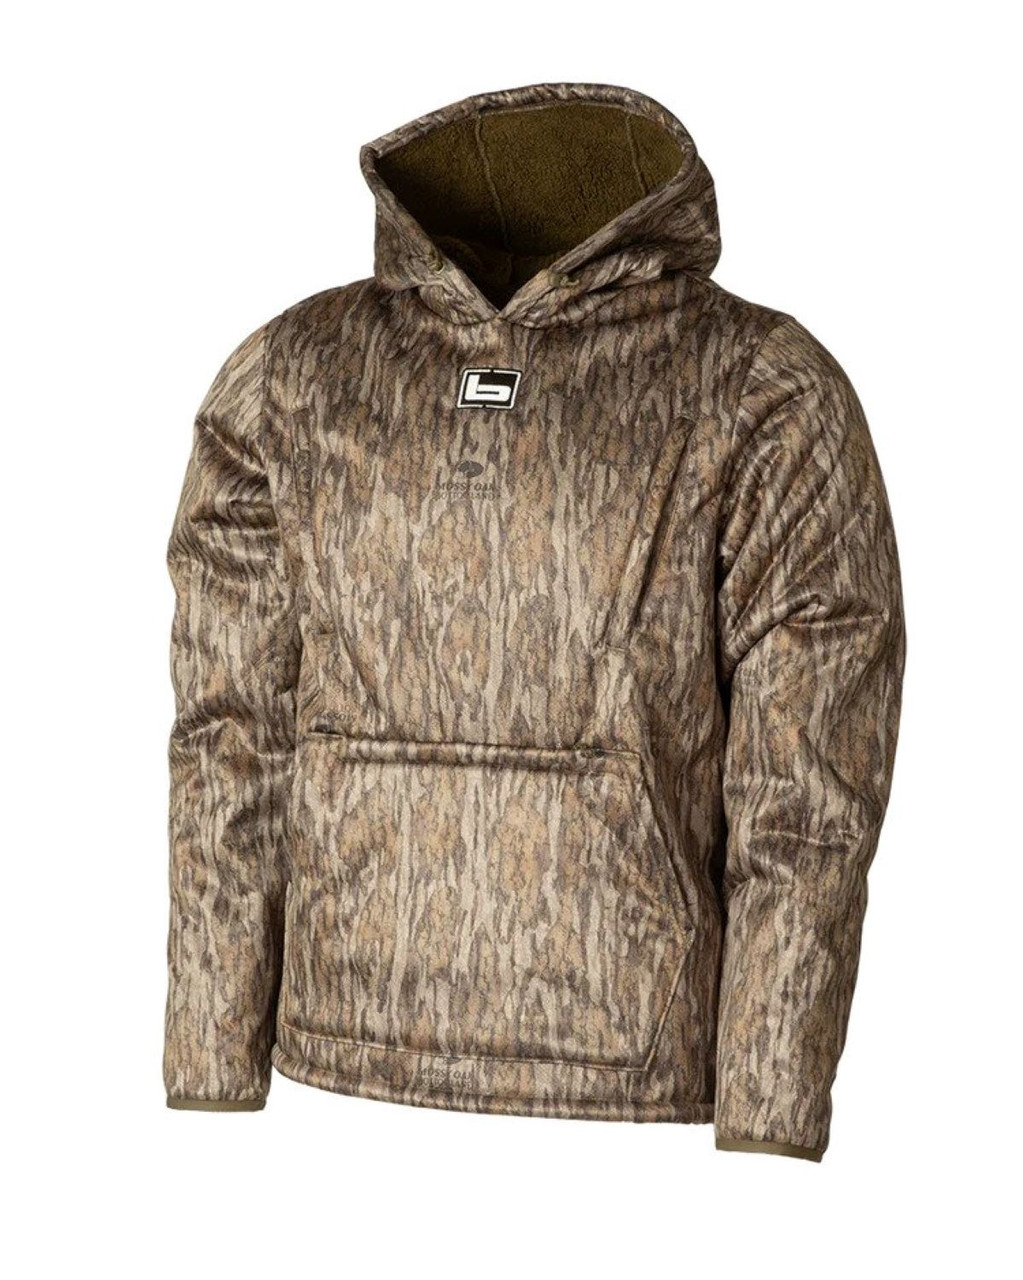 Banded Fanatech Softshell Hoodie Coral-Fleeced Lined - Bottomland - 3XL